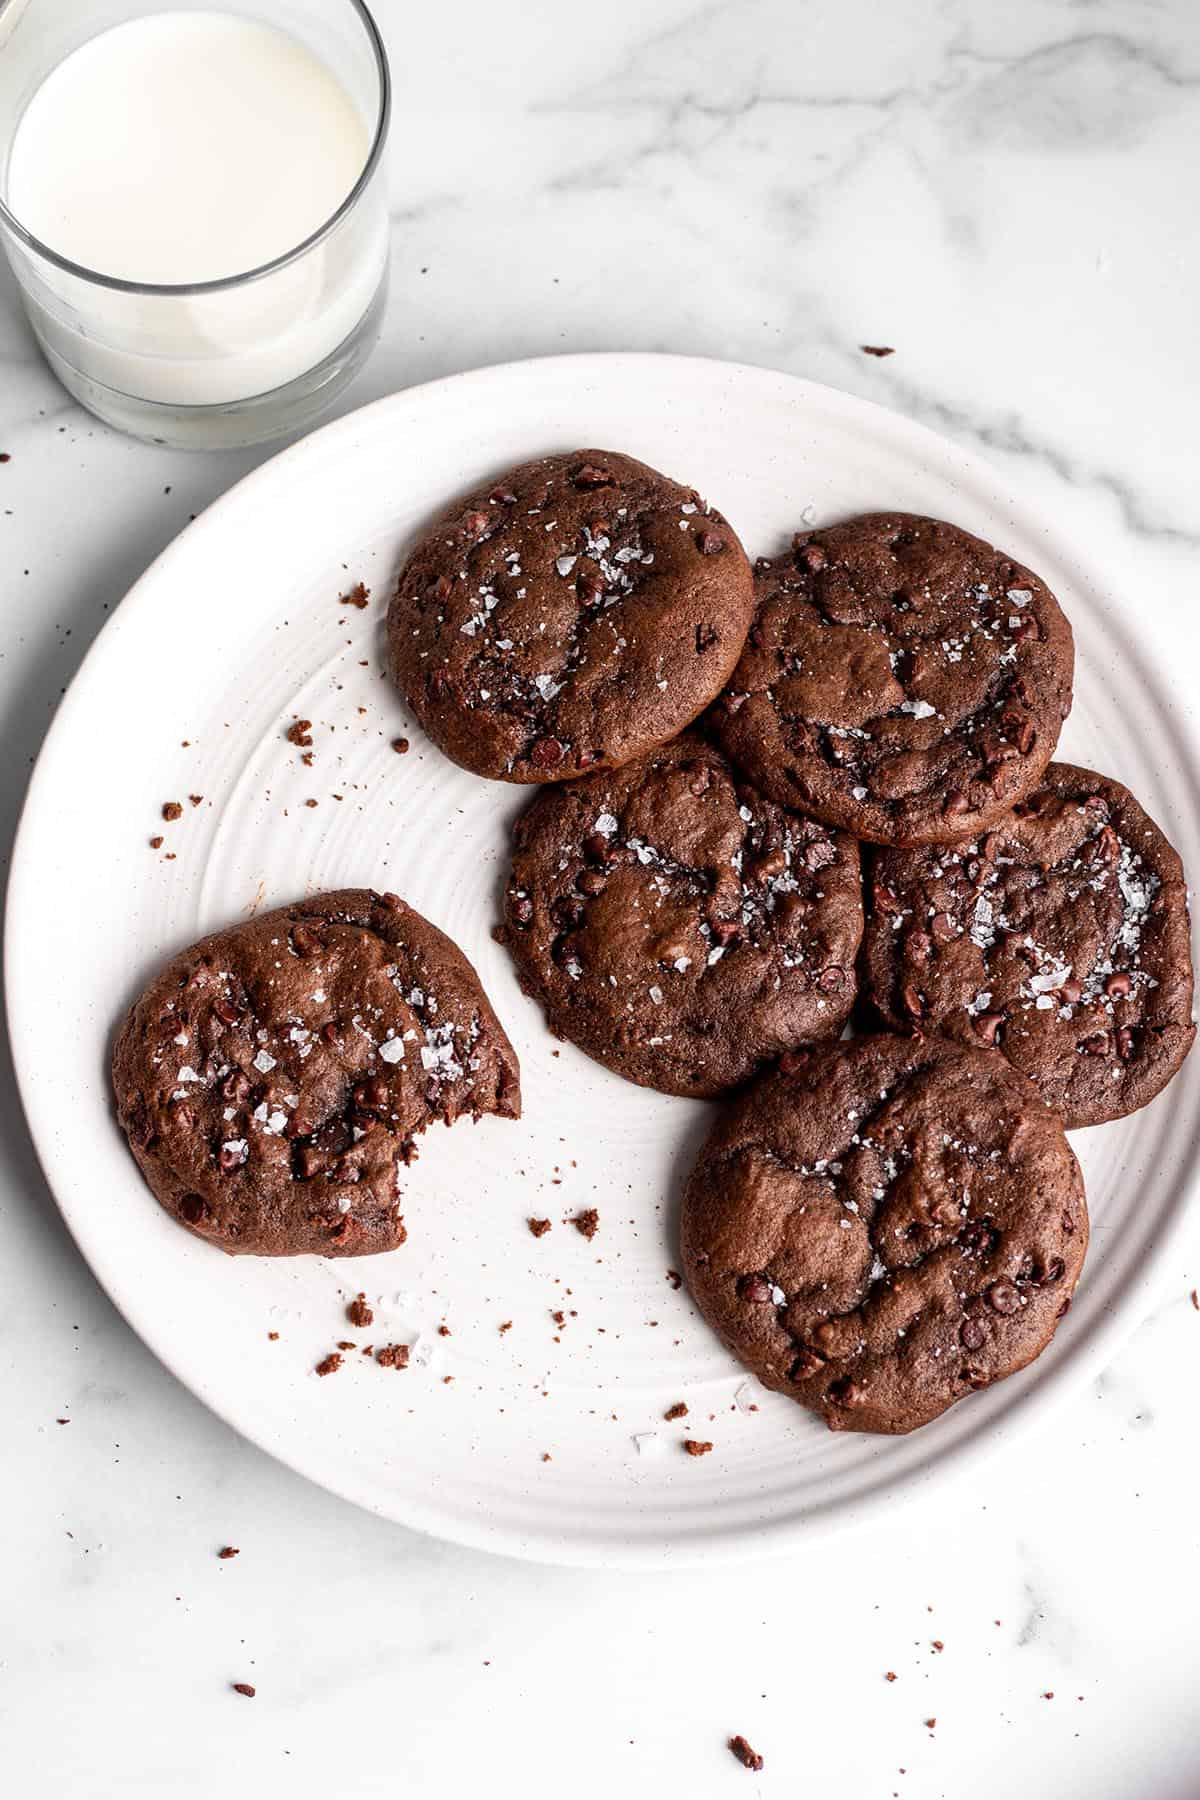 Chocolate cookies with flaky salt on a white plate.